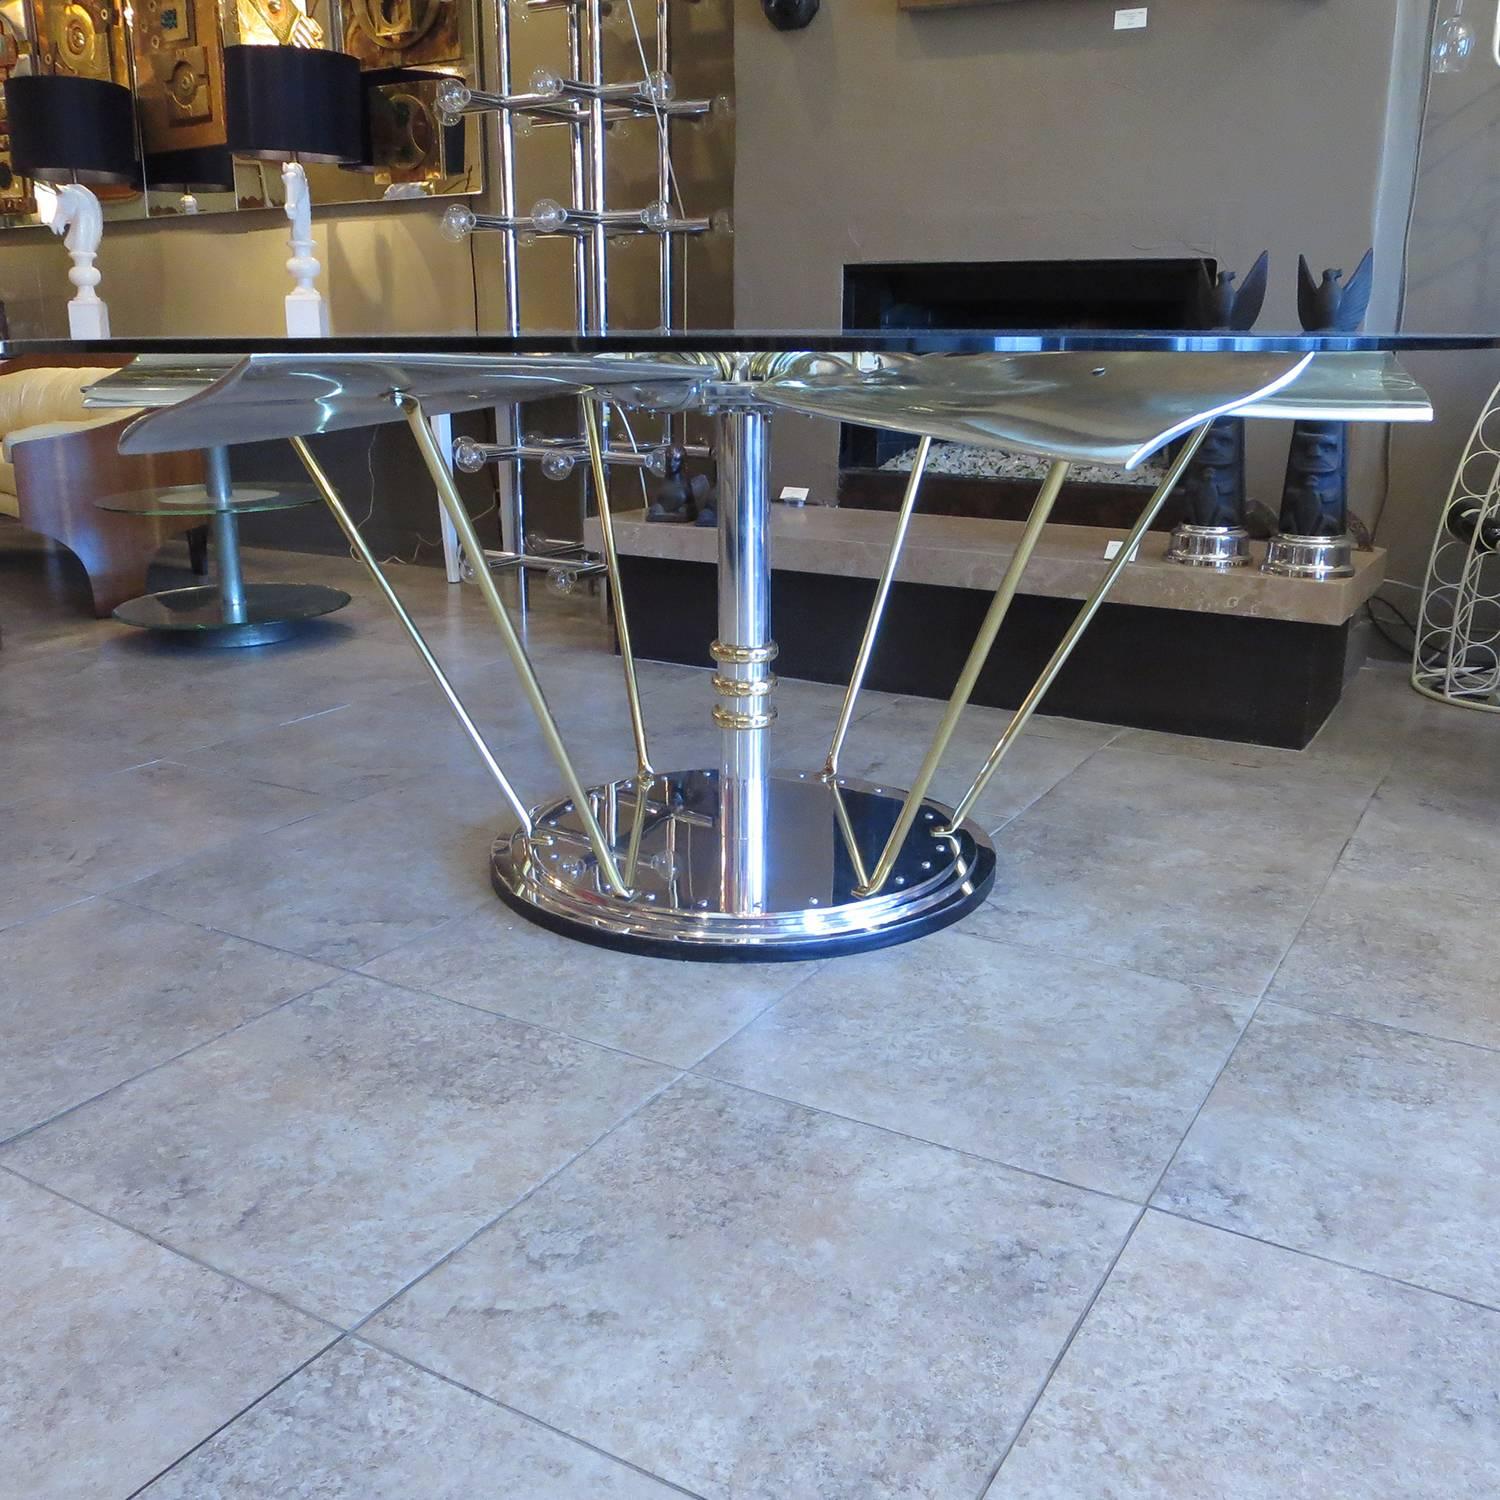 A six bladed propeller was the genesis of this incredible table. We designed and created the base of highly polished aluminum, with brass accents. The propeller blades are bolted in with brass U bolts, over a polished aluminum sleeve. The blades are